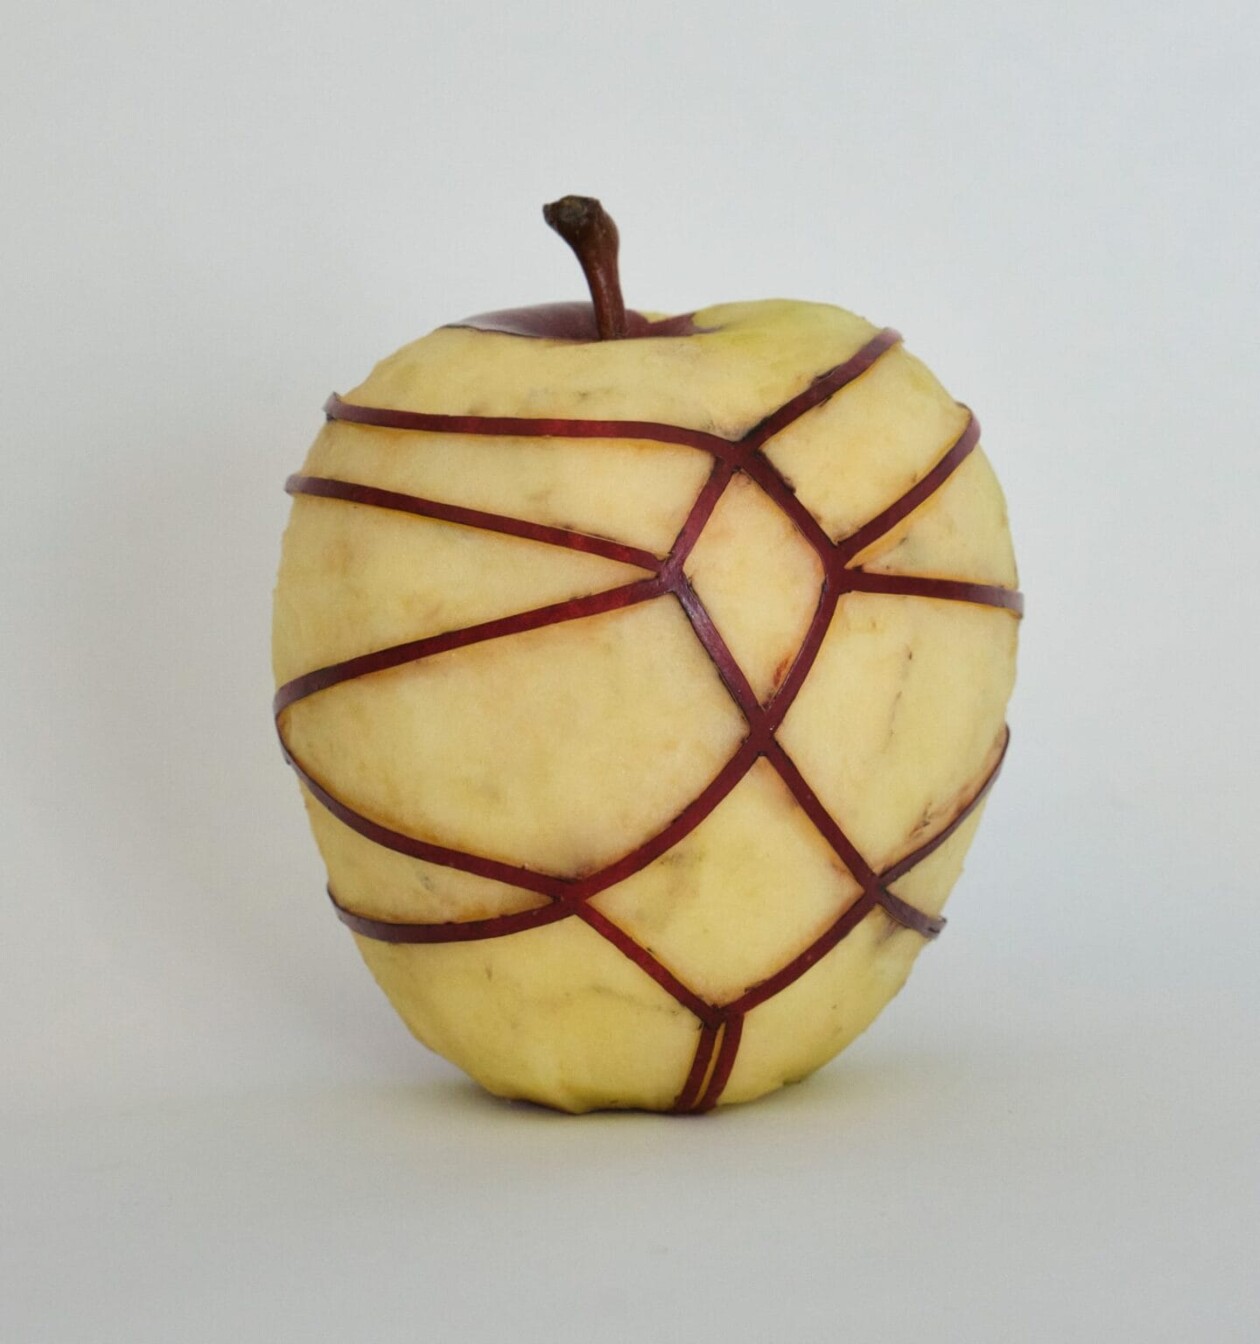 Smart And Playful Sculptures Carved Out Of Apples By Chinese Artist Can Sun (1)